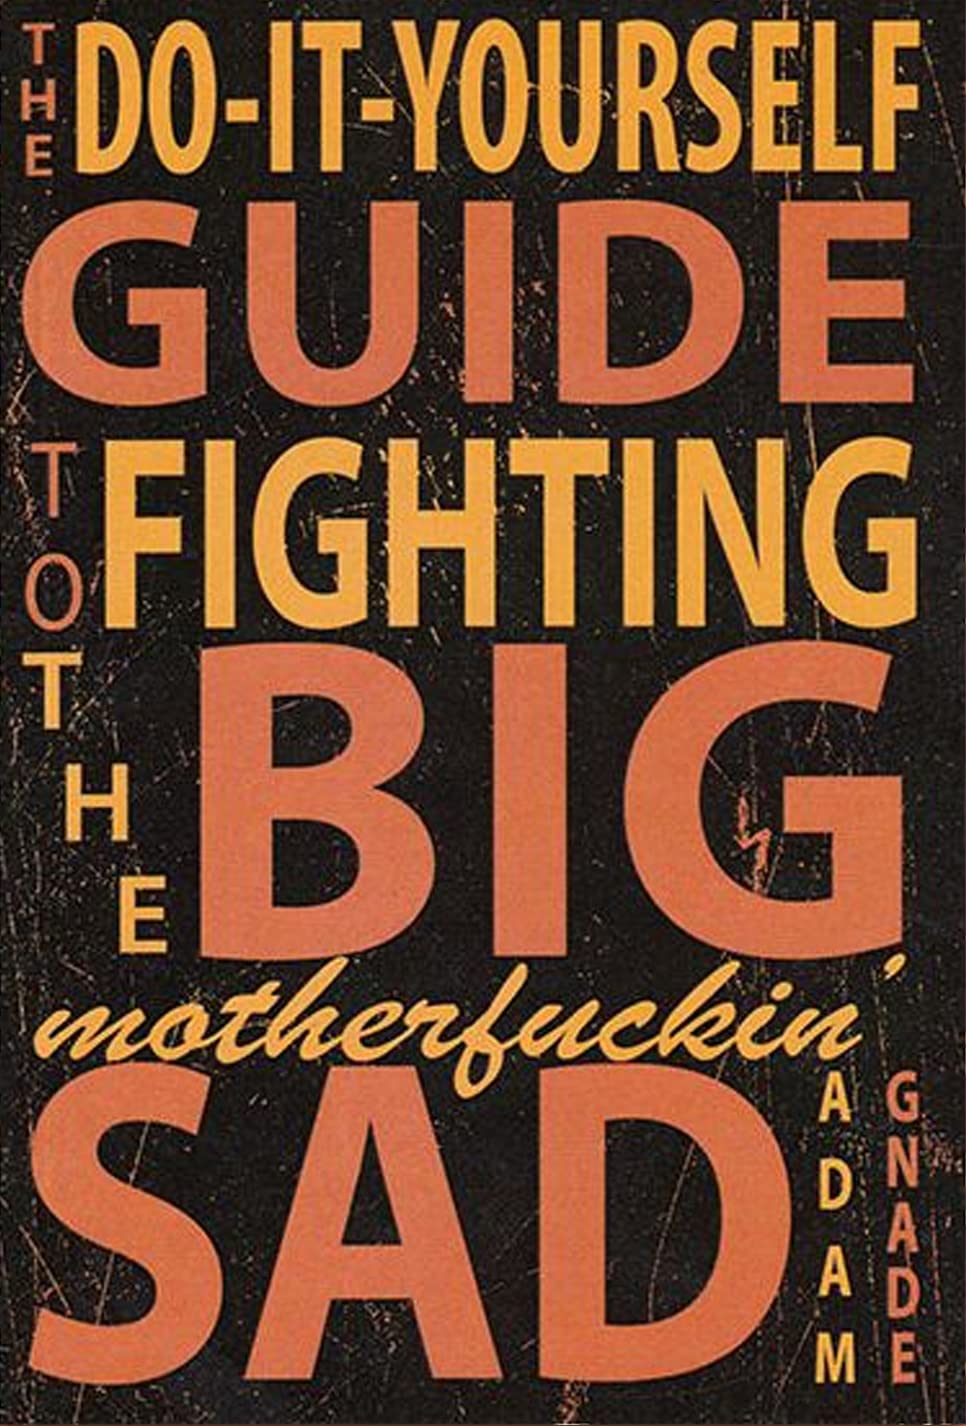 Do-it-yourself Guide to Fighting the Big Motherfuckin Sad